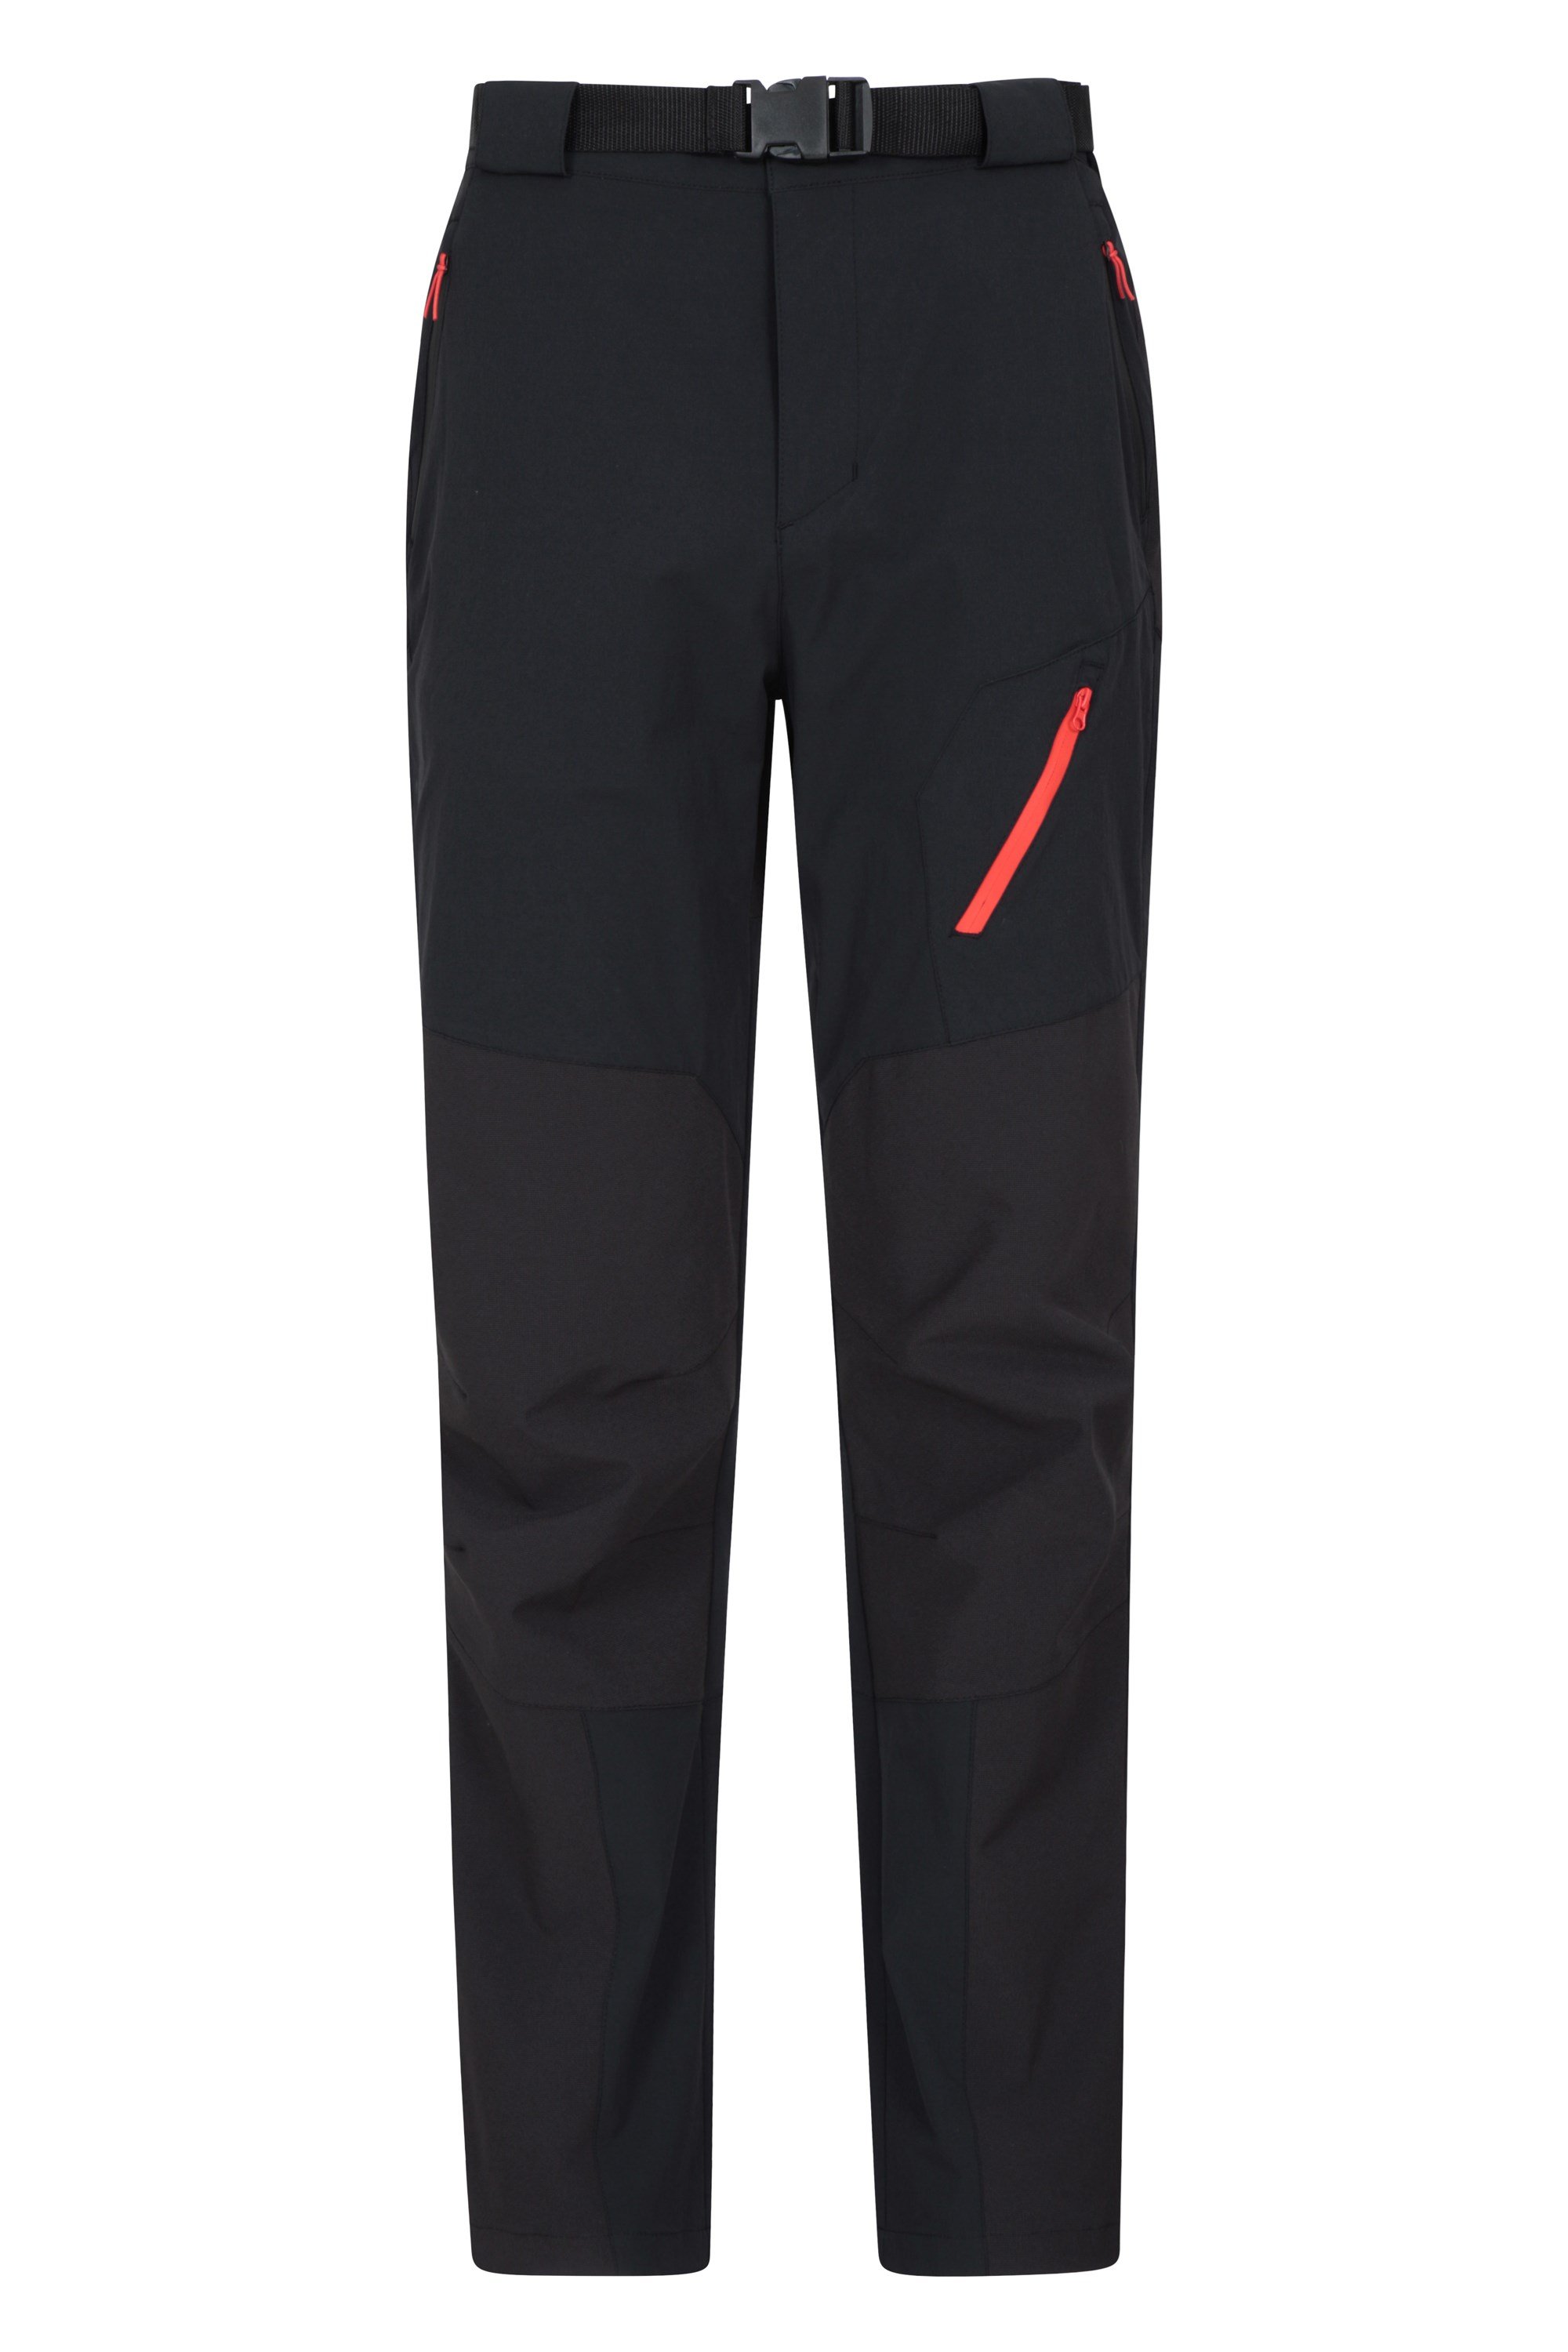 Forest Mens Water-Resistant Trekking Trousers - Black